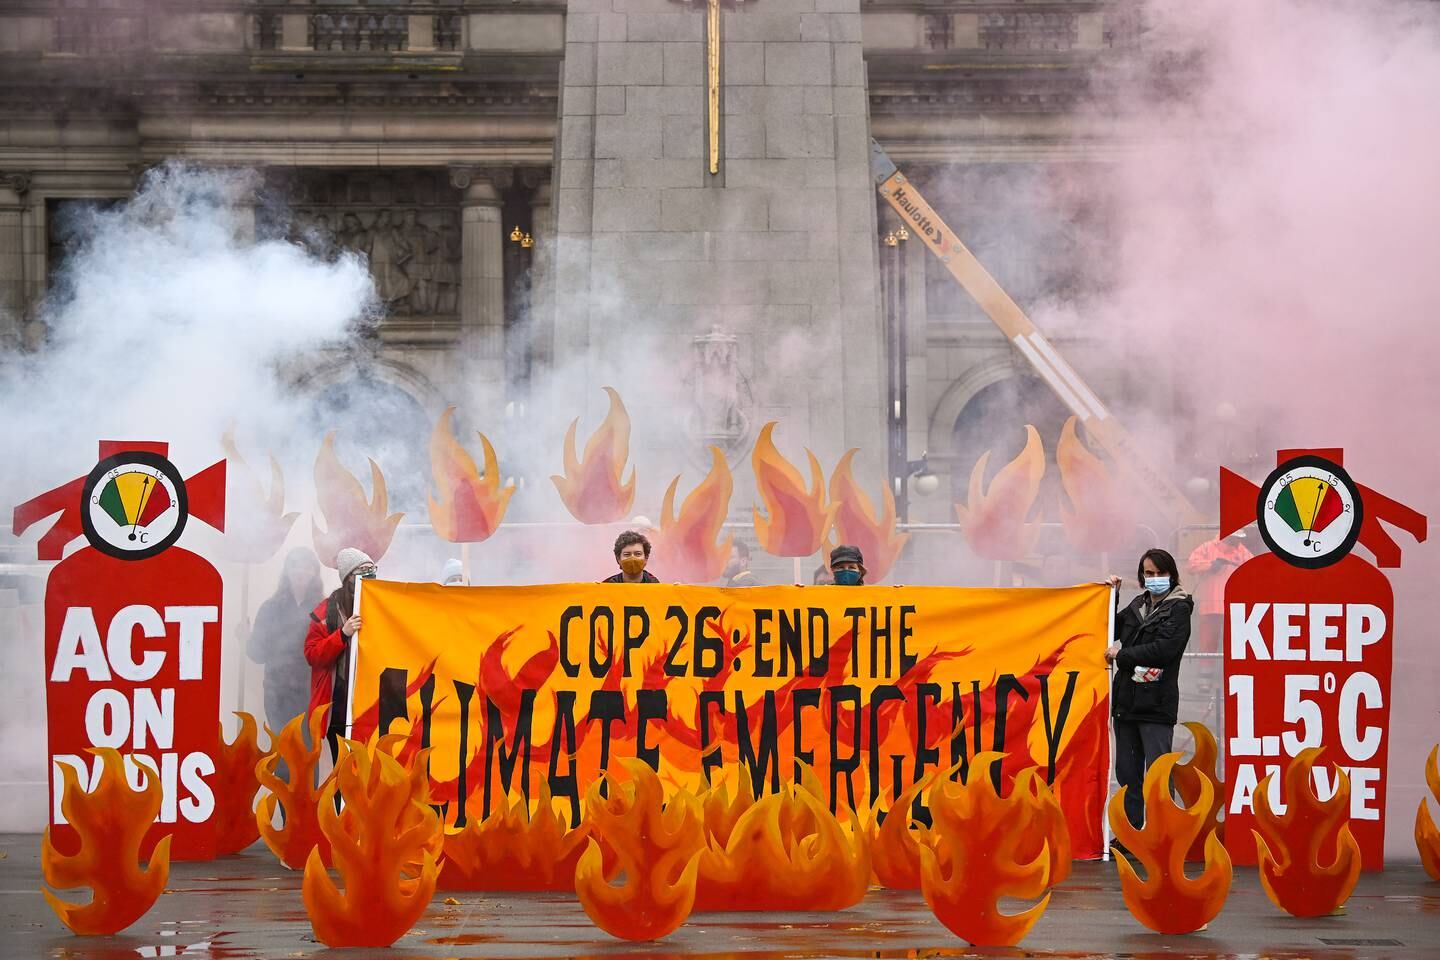 Activists will welcome world leaders to COP26 with a field of climate fire in George Square in Glasgow, Scotland. The group symbolically set George Square “on fire” with an art installation of faux flames, smoke, and banners, showcasing the climate emergency, and massive fire extinguishers highlighting actions world leaders should take at the upcoming COP26 climate negotiations.